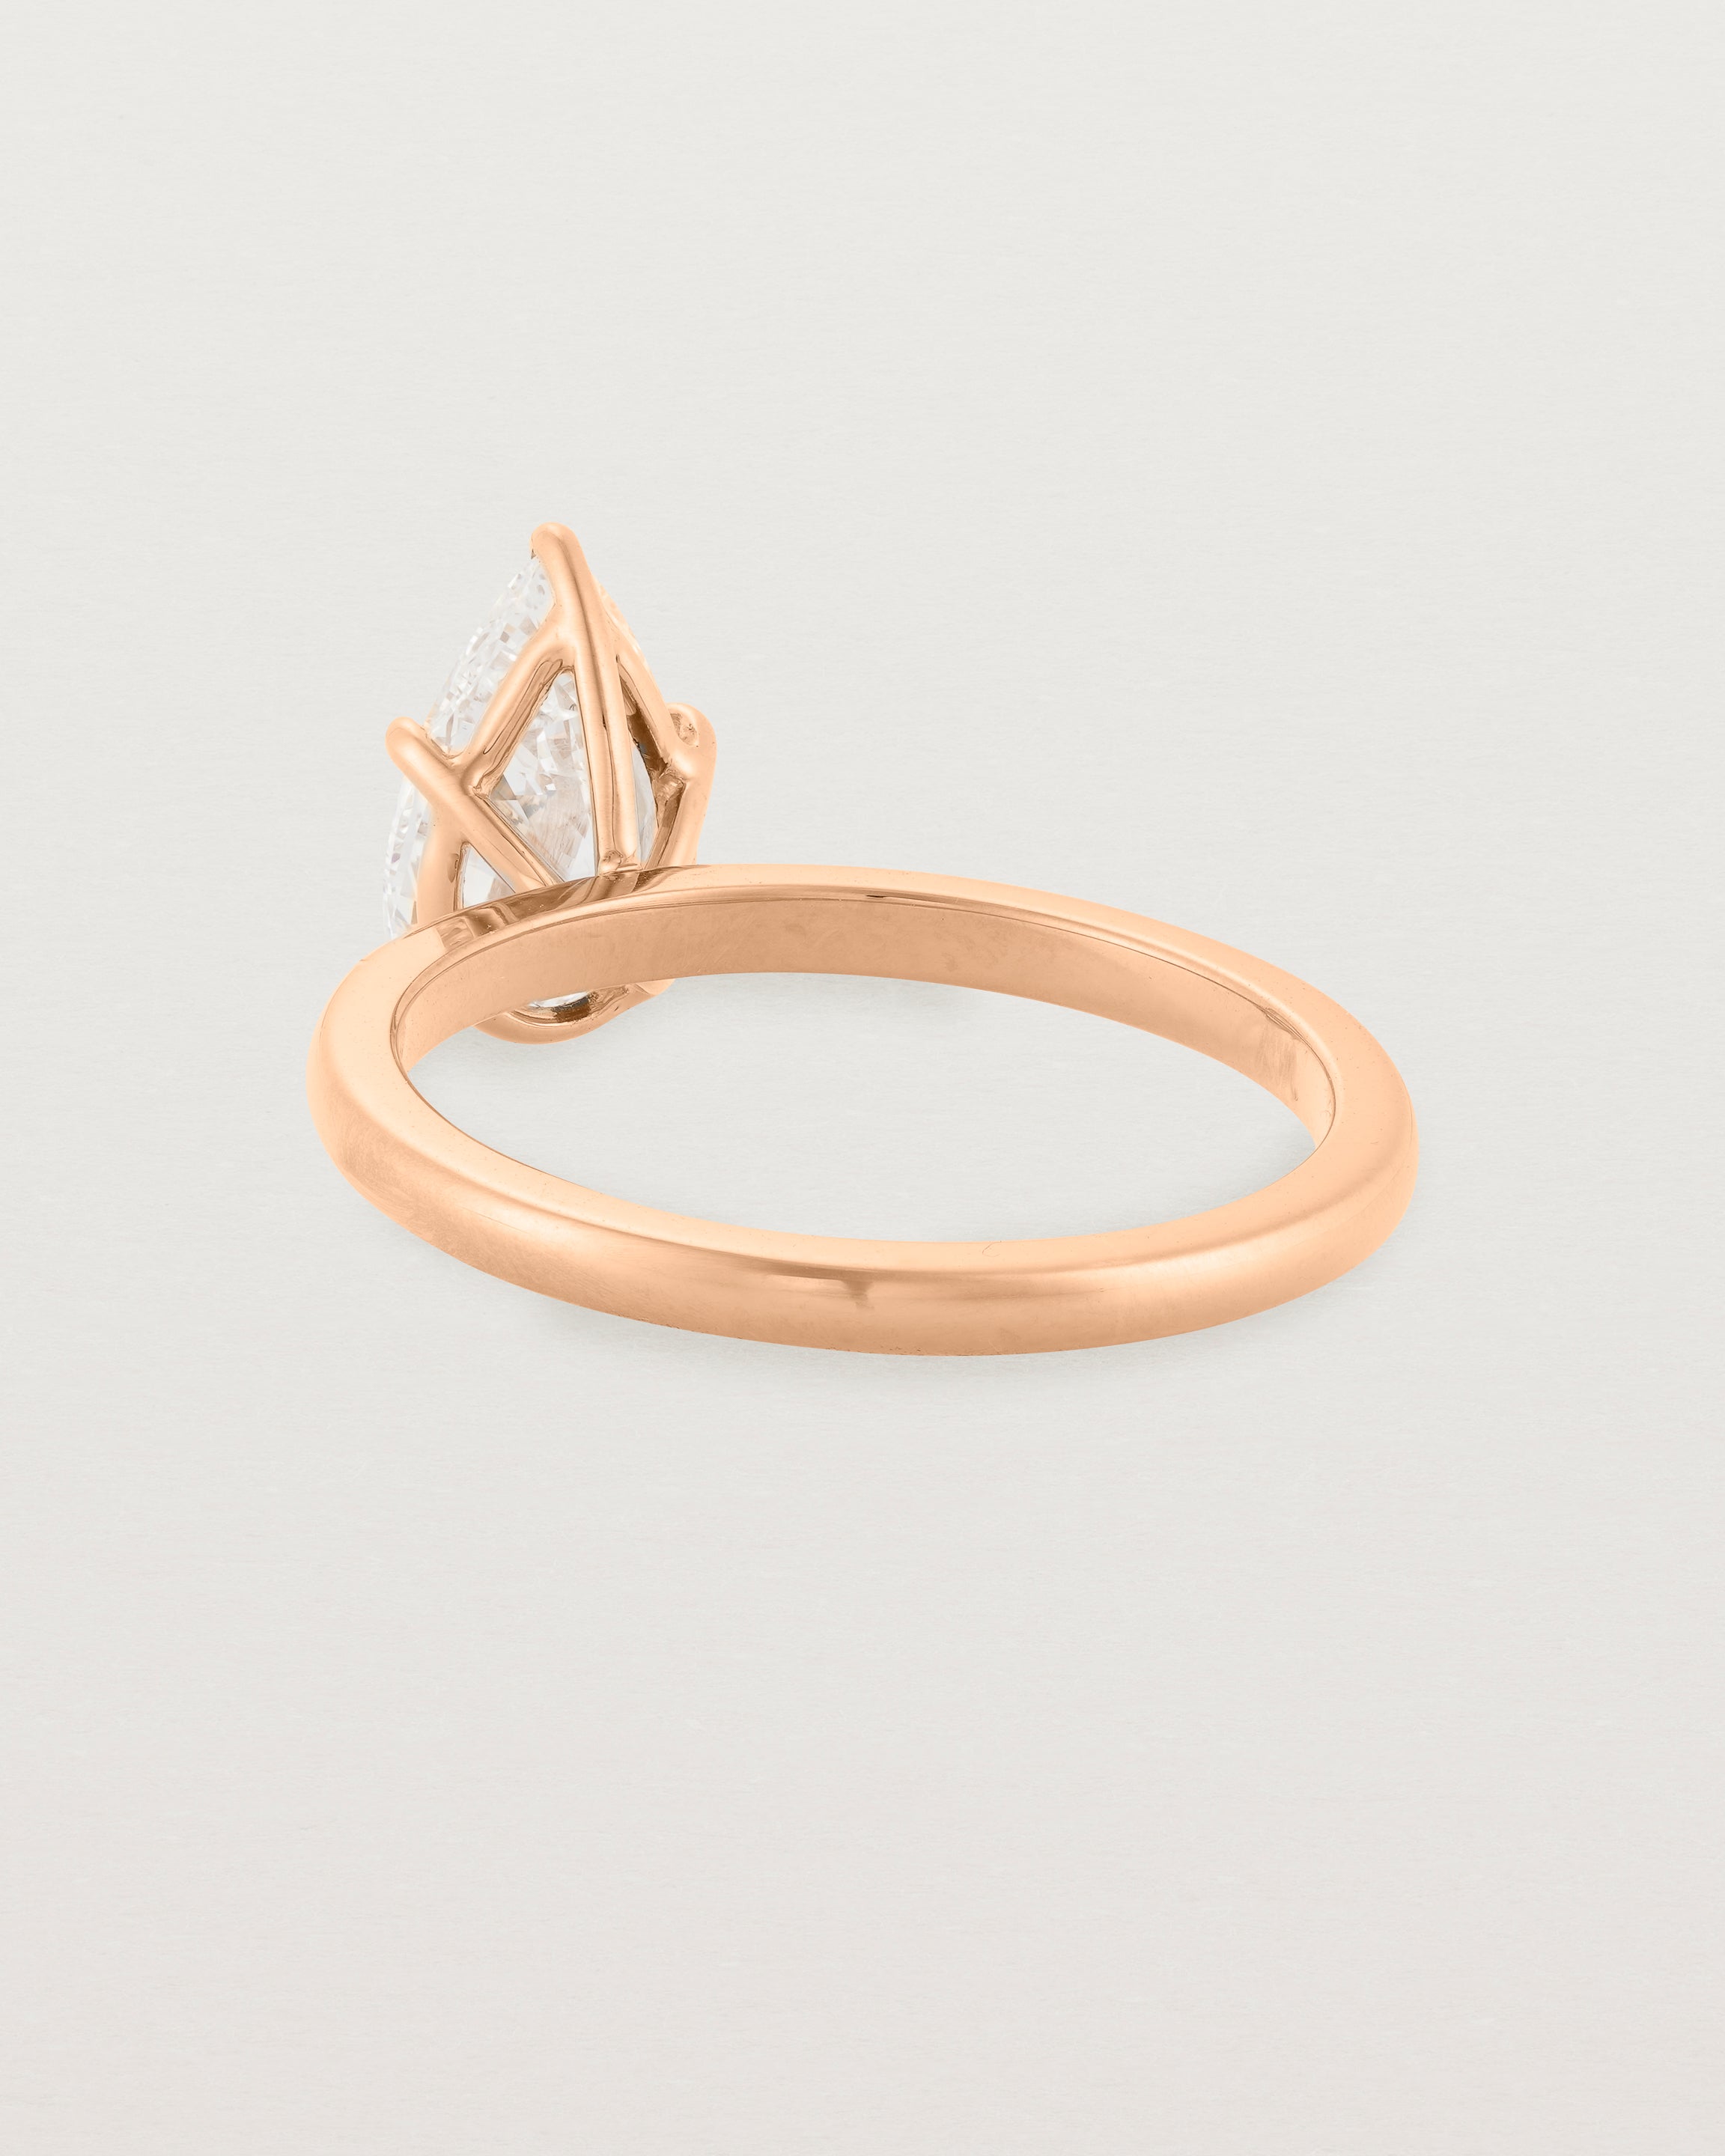 Back view of a 1.20ct pear cut diamond set in our Signature Solitaire setting crafted in rose gold